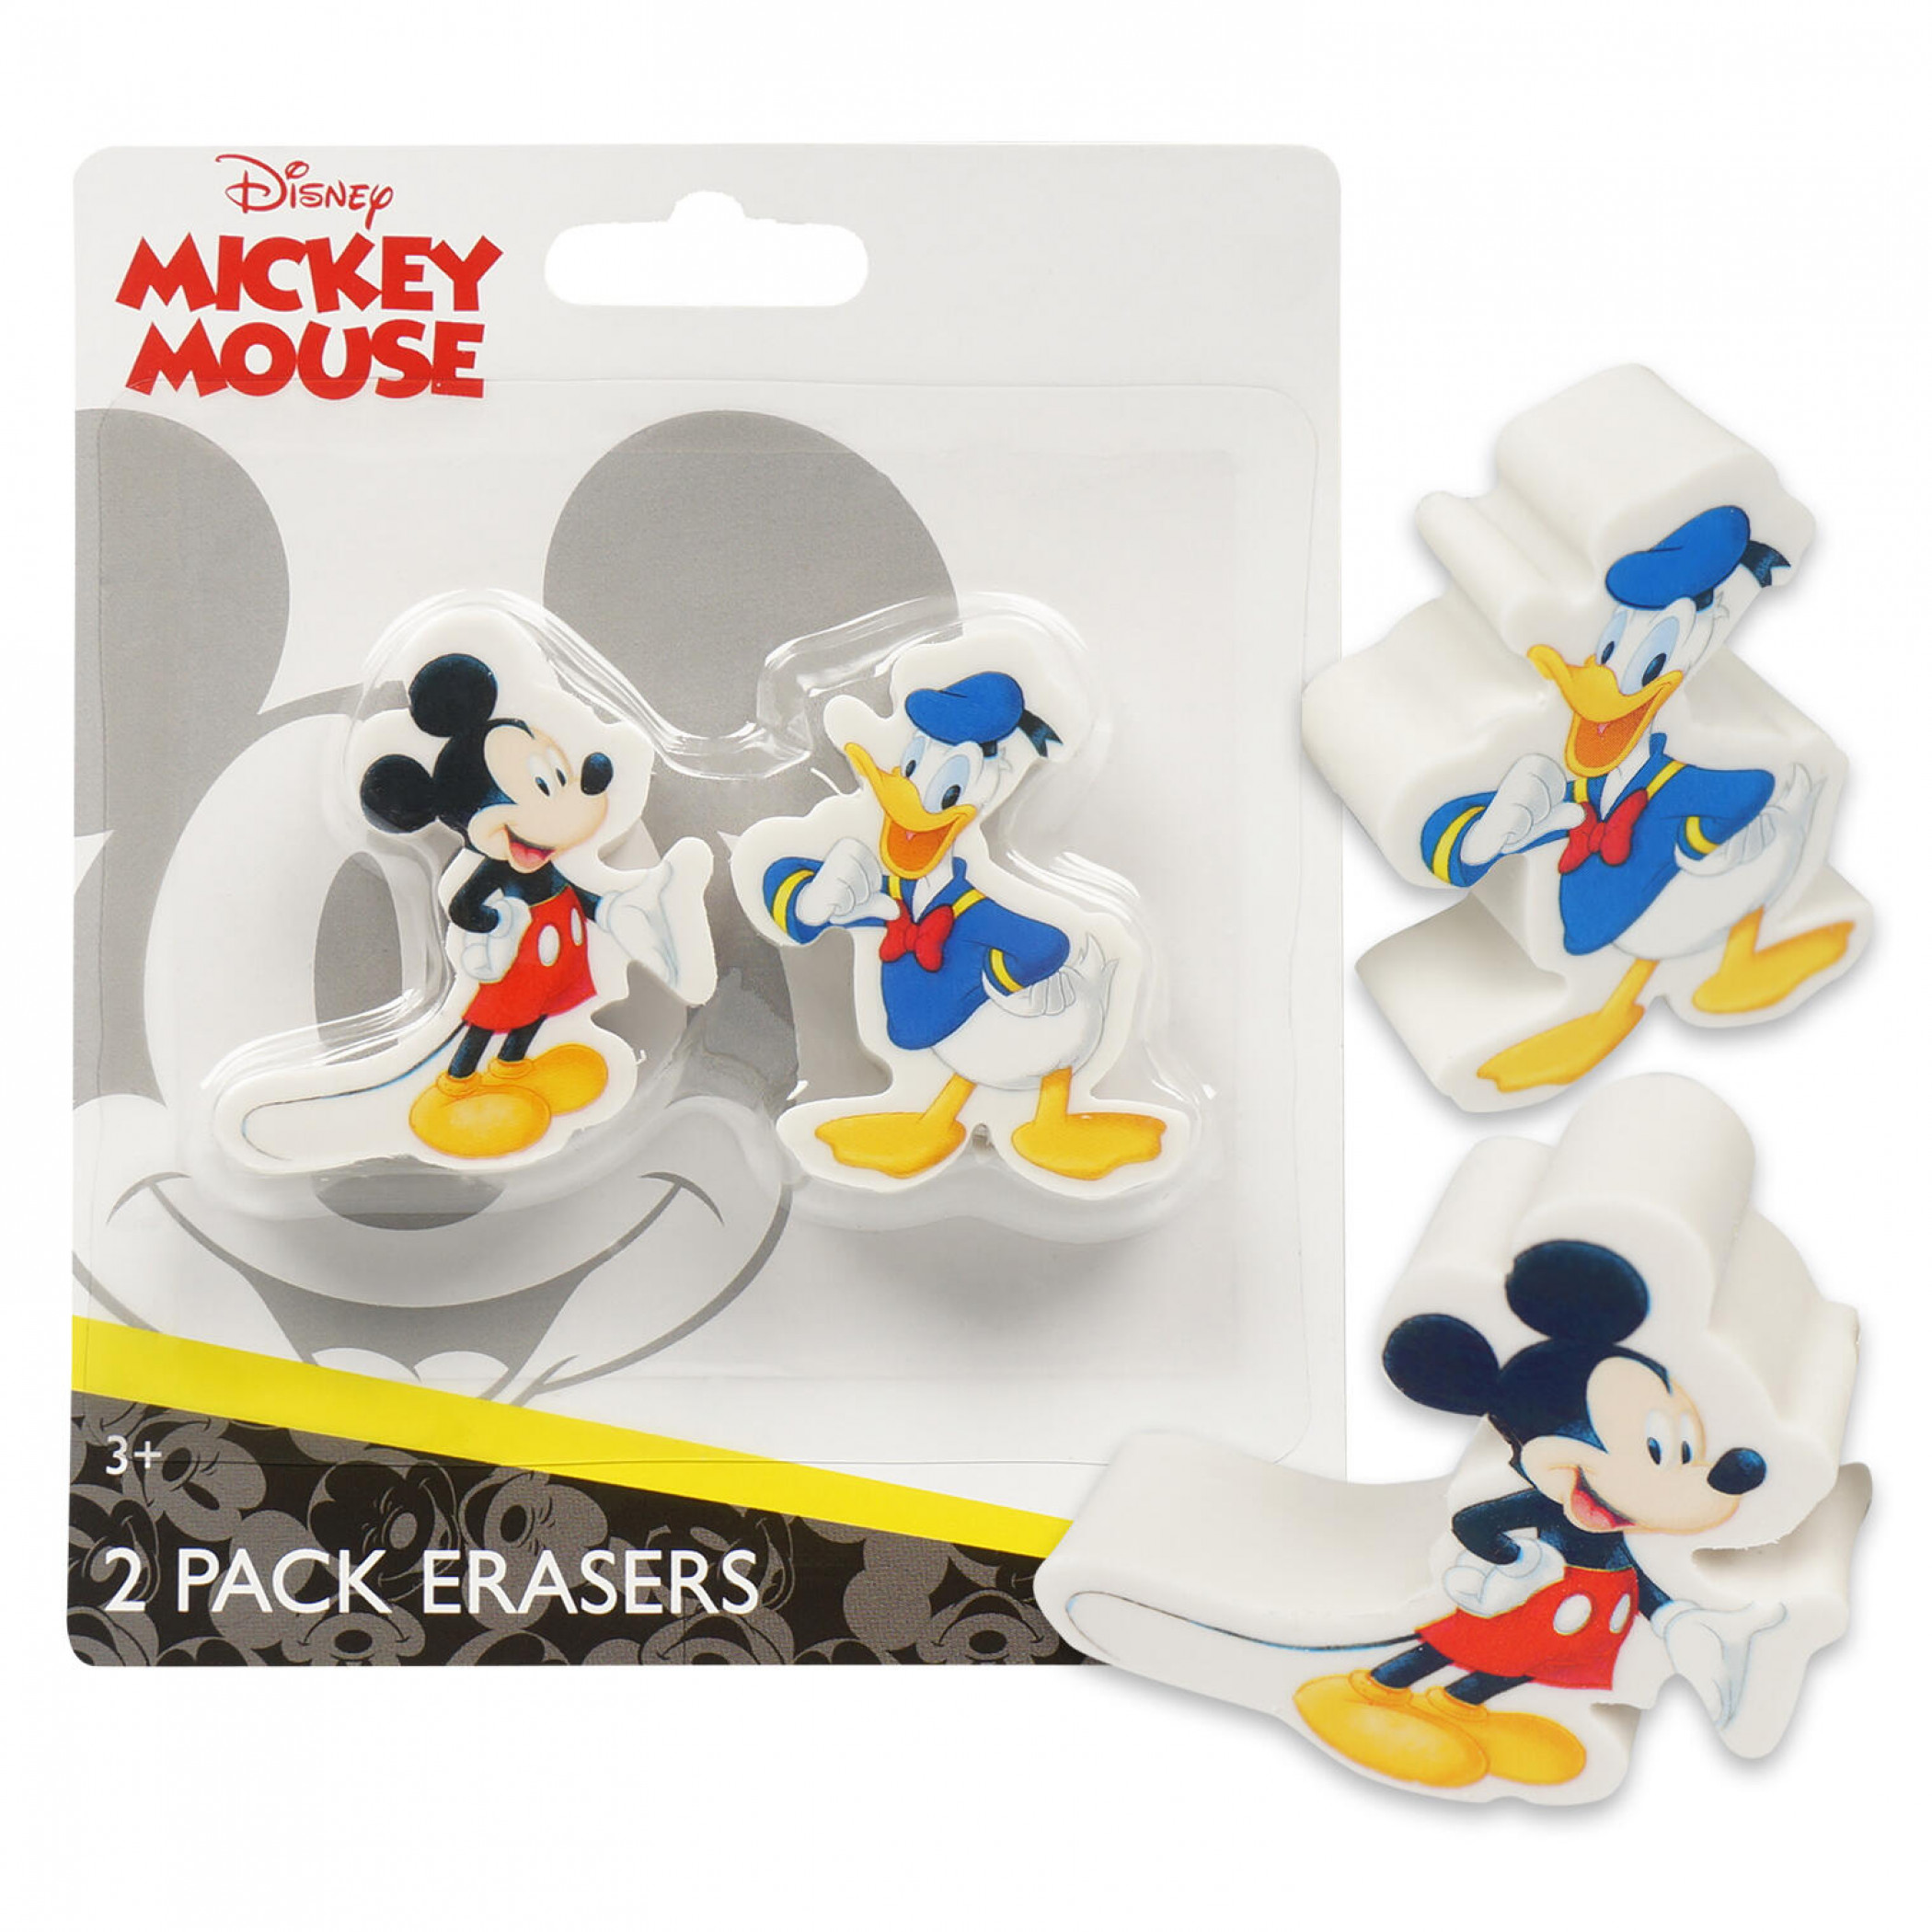 Mickey Mouse and Donald 2-Pack Eraser Set